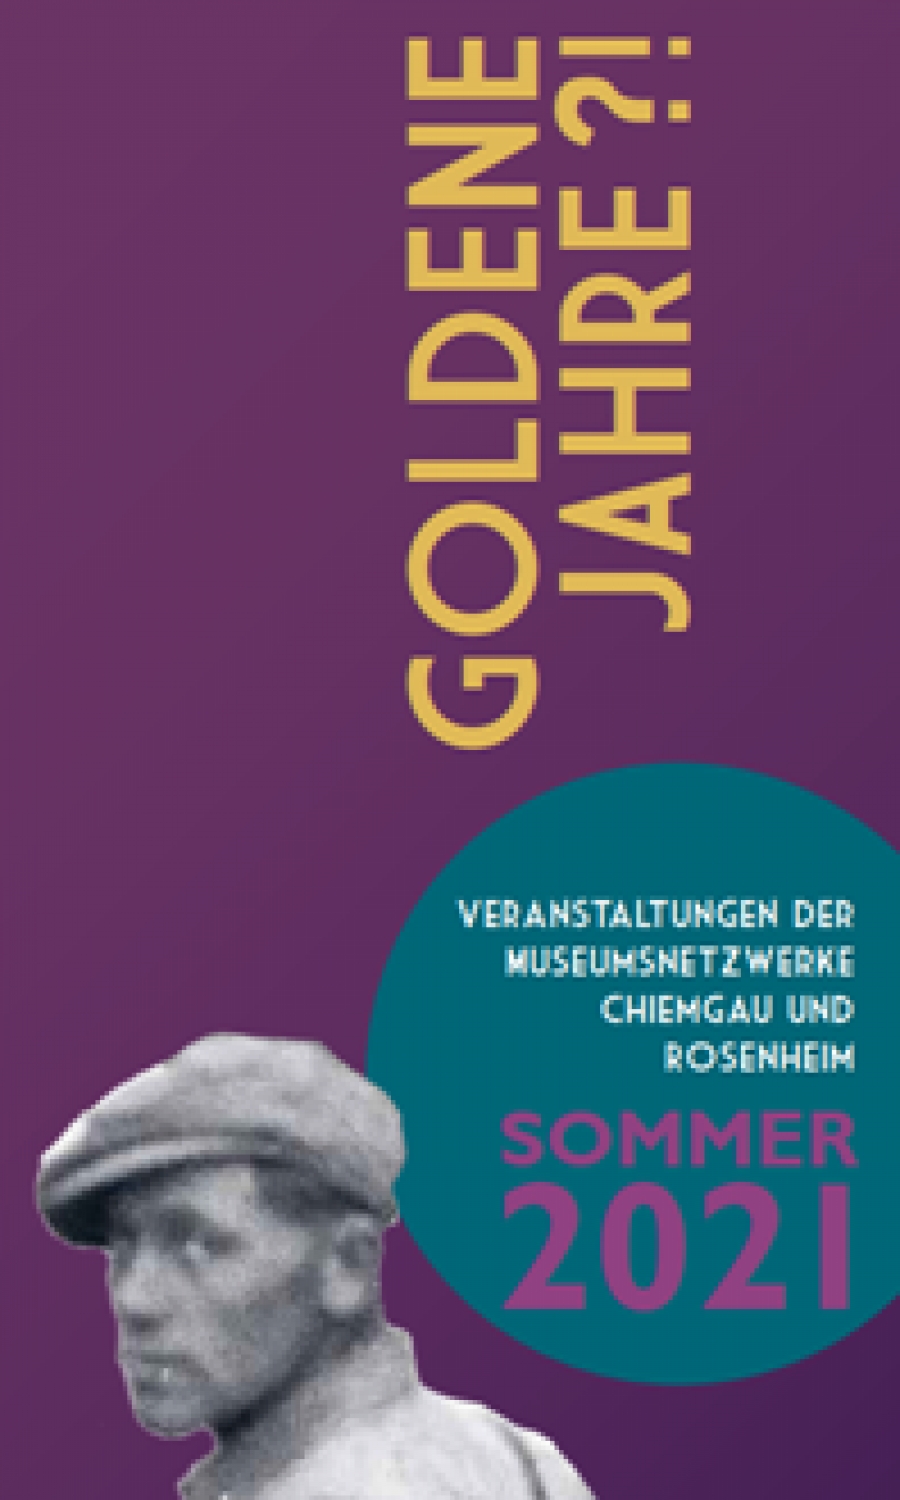 Goldene Jahre in Bad Aibling